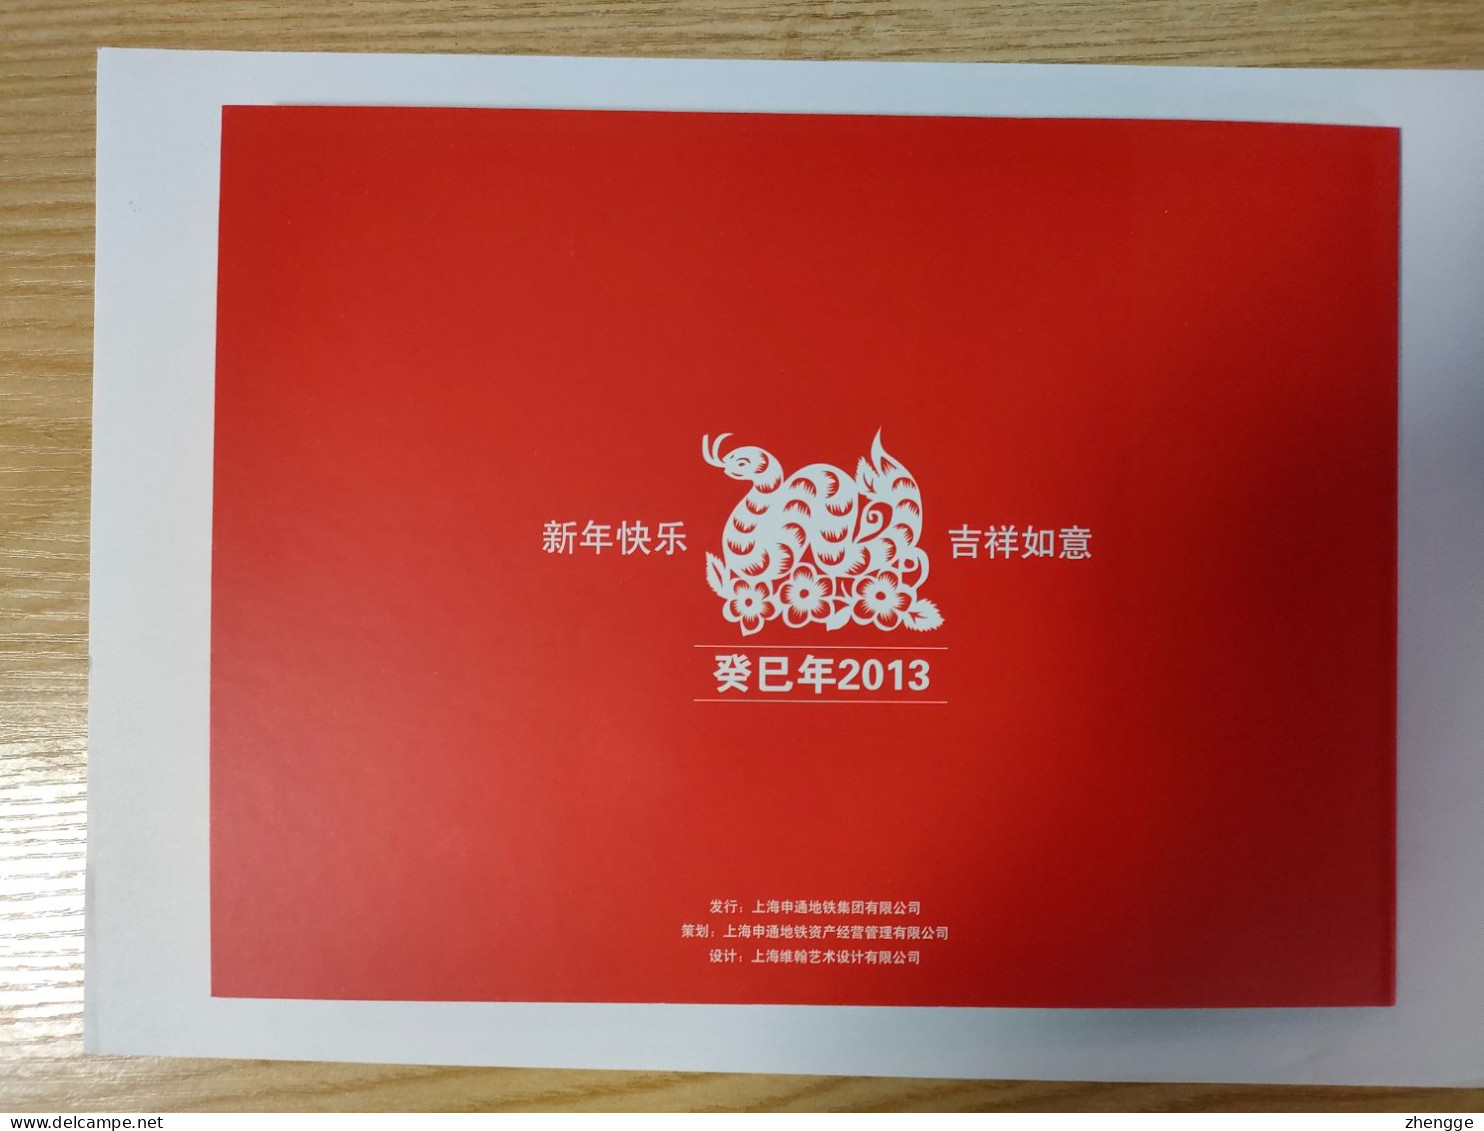 China Transport Cards, Year Of The Snake, Metro Card, Shanghai City, 24 Hours Unlimited Card, (2pcs) - Unclassified